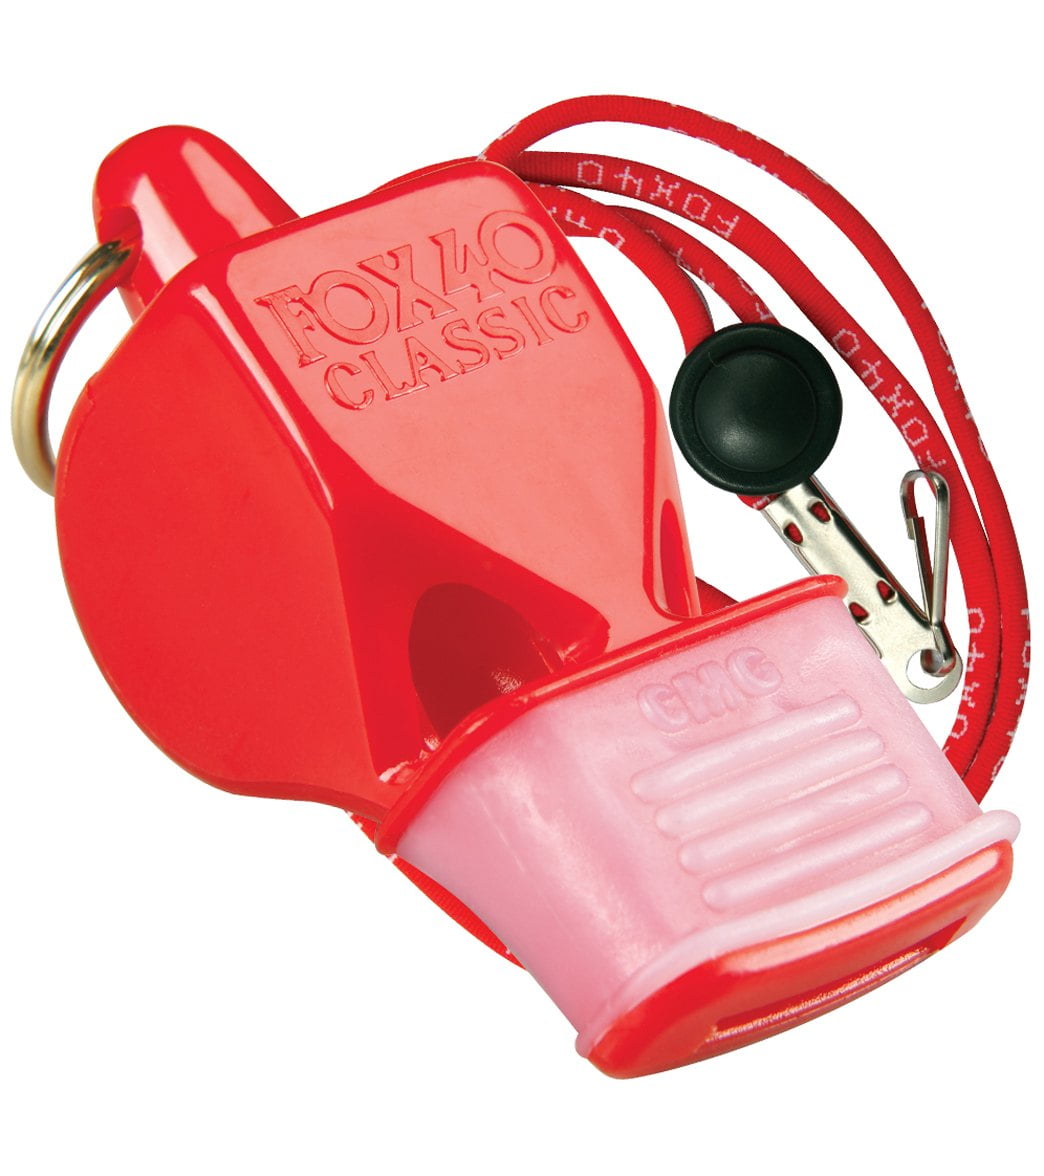 Fox 40 Classic CMG Whistle With Breakaway Lanyard Blue for sale online 